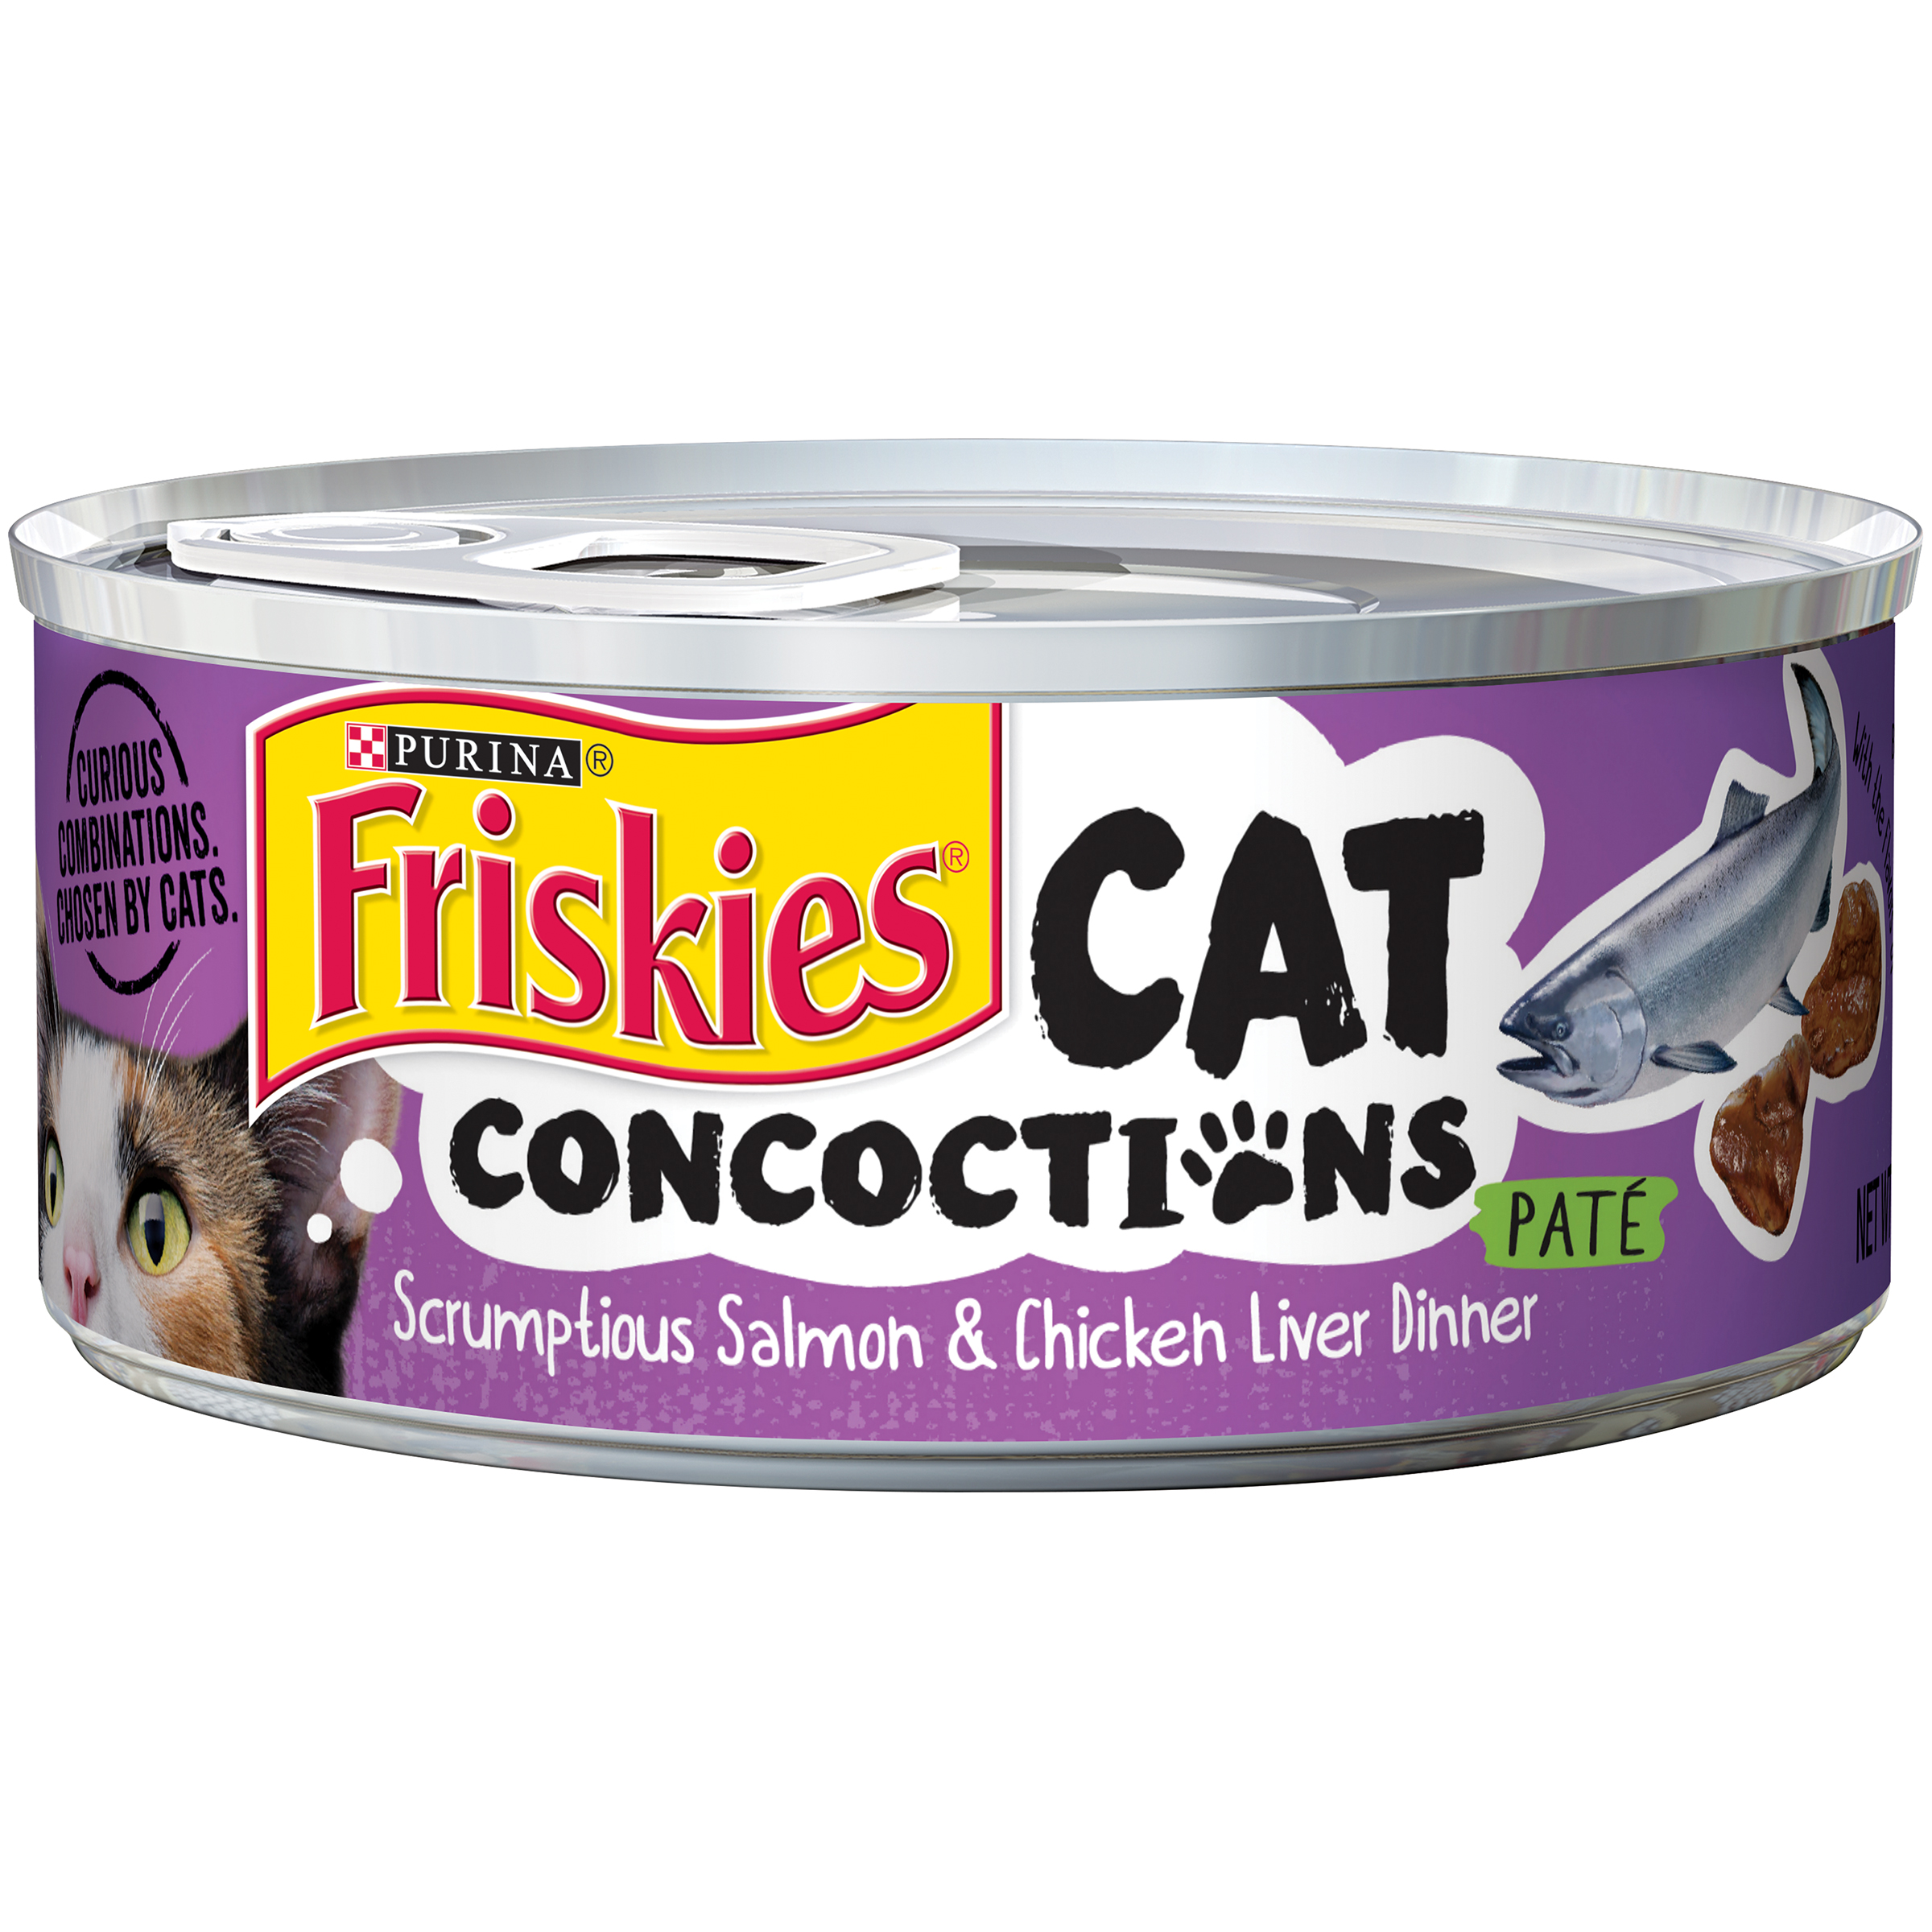 0050000962860 - CAT CONCOCTIONS PAT&#233; SCRUMPTIOUS SALMON & CHICKEN LIVER DINNER CAT FOOD